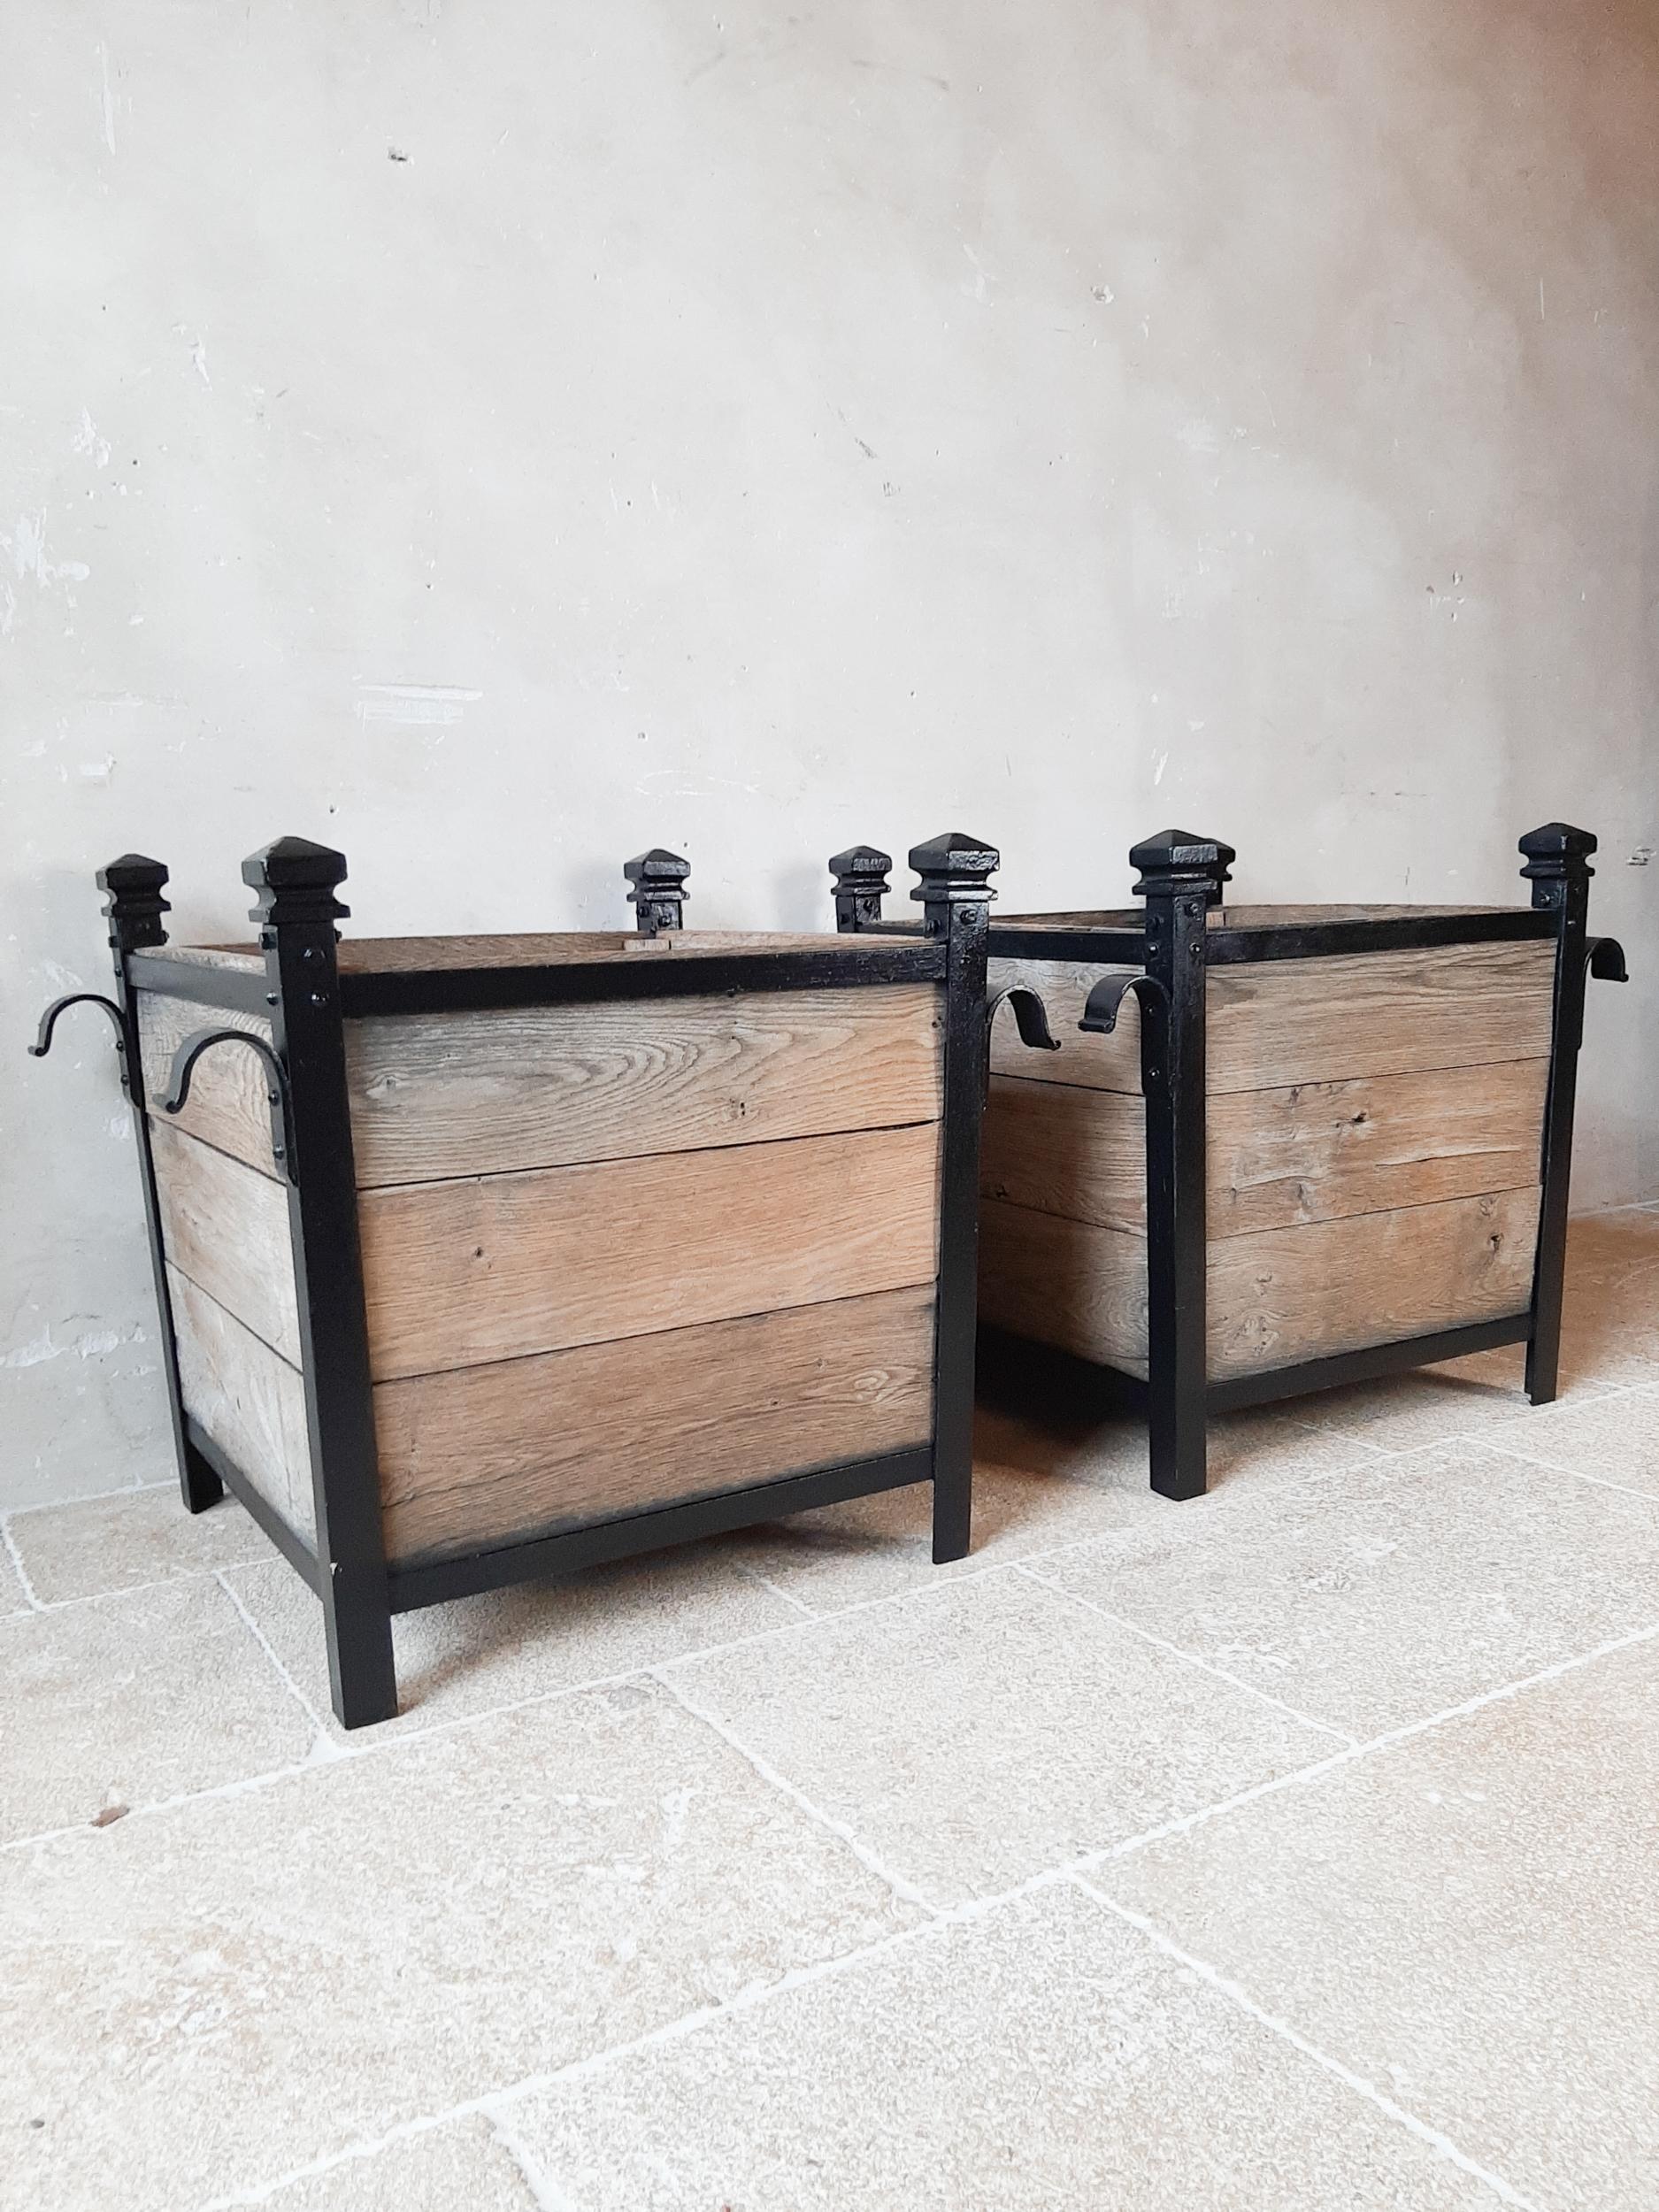 Pair of antique orangery planters. Two large square planters in weathered oak and riveted wrought iron frame and supports, with cast iron corners.

Dimensions: L 77 x W 63 x H 66.5 cm
length x width top of wooden box: 60 x 60 cm.